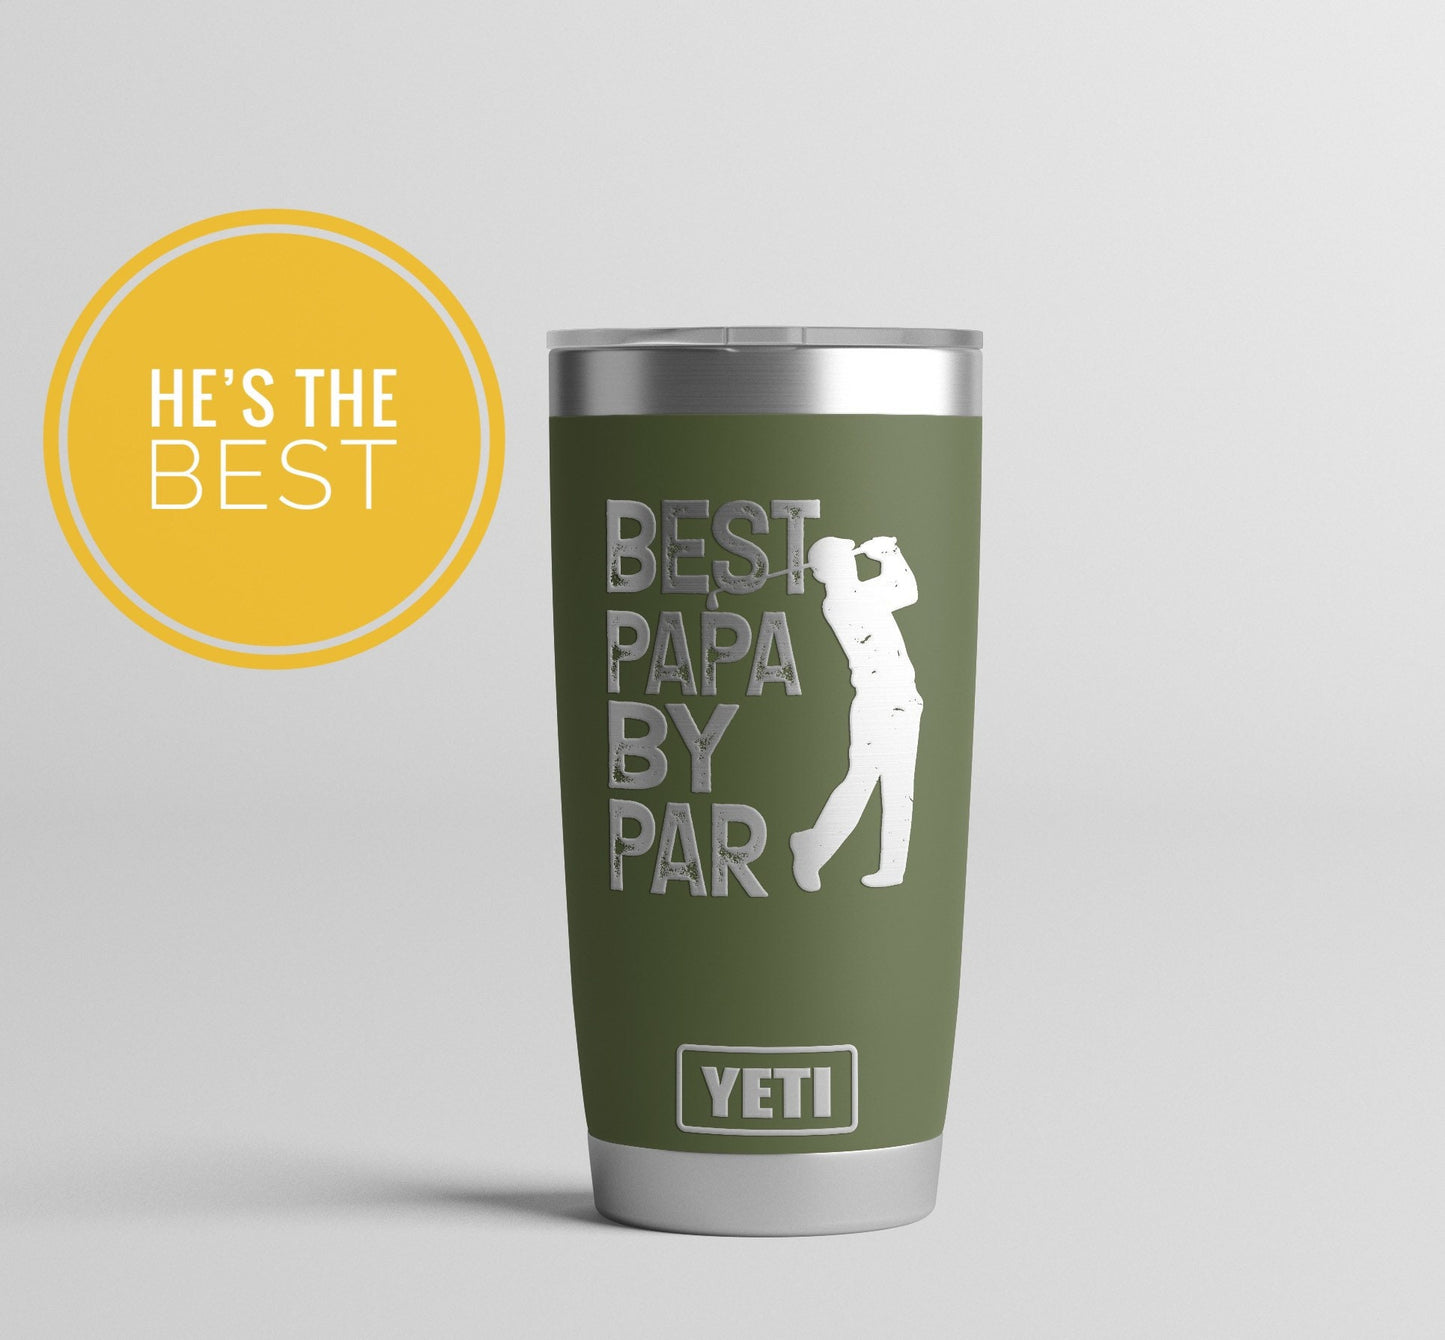 Best Grandpa By Par Personalized Engraved YETI Tumbler - Father's